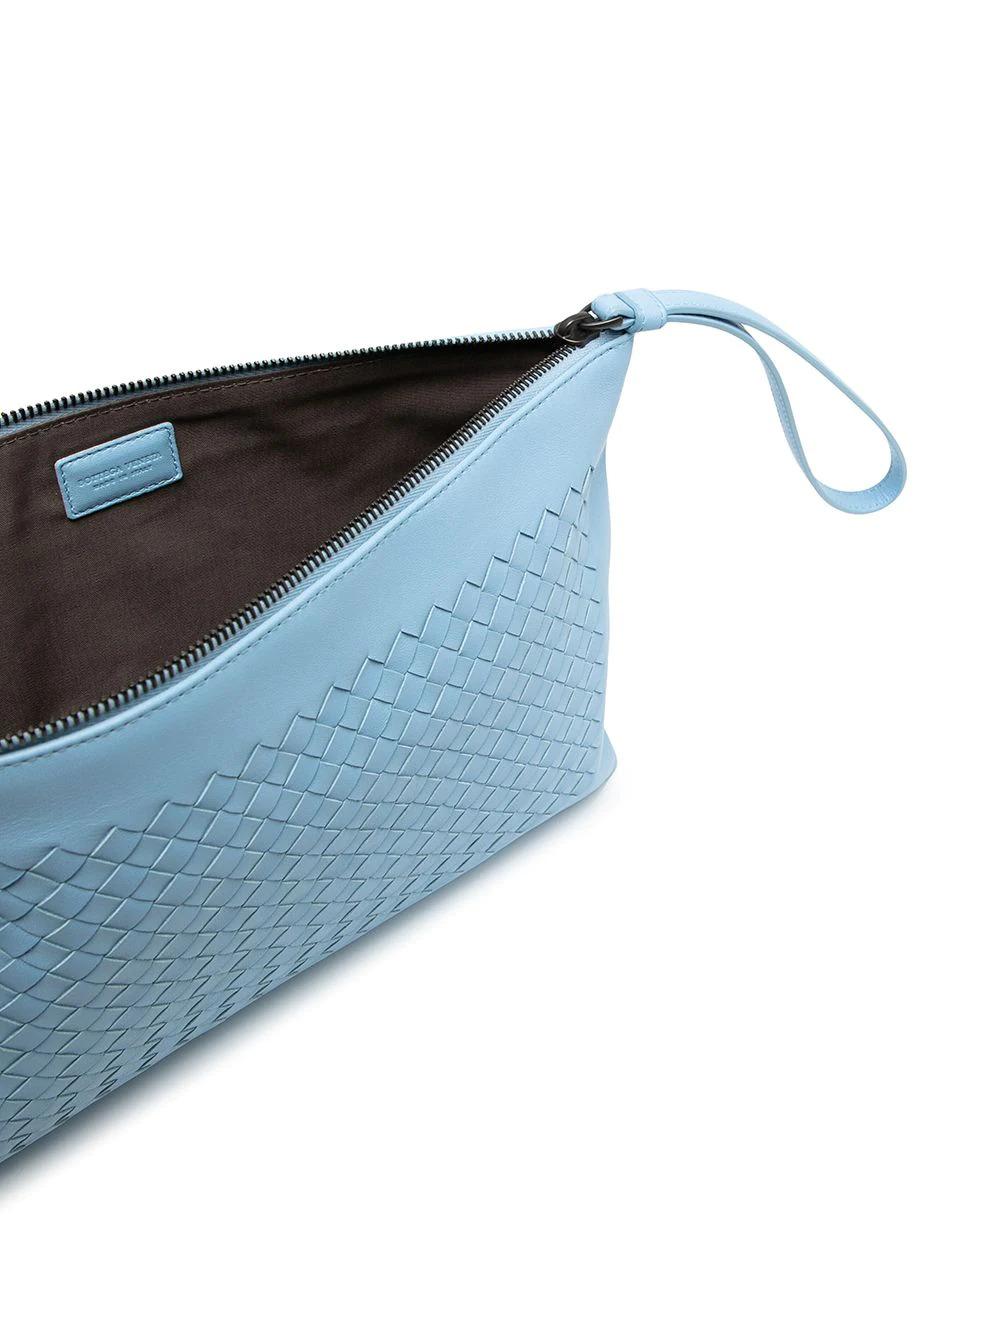 The signature intrecciato weaving was created by Bottega Veneta in the late 1960s and involves strips of leather that are intertwined to create a woven pattern. The perfect bag to compliment your everyday outfit, this pre-owned light blue